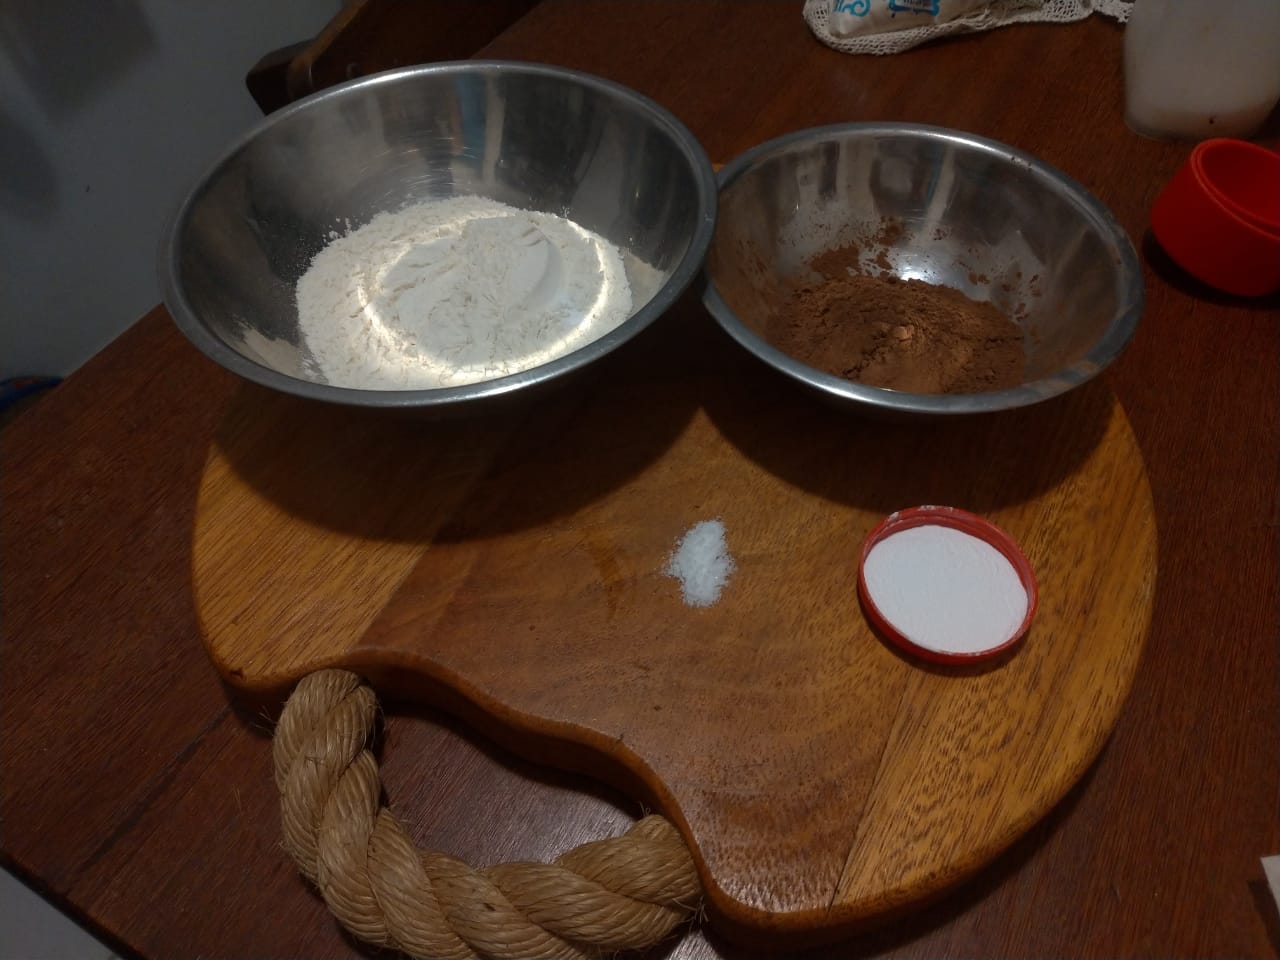 The dry ingredients